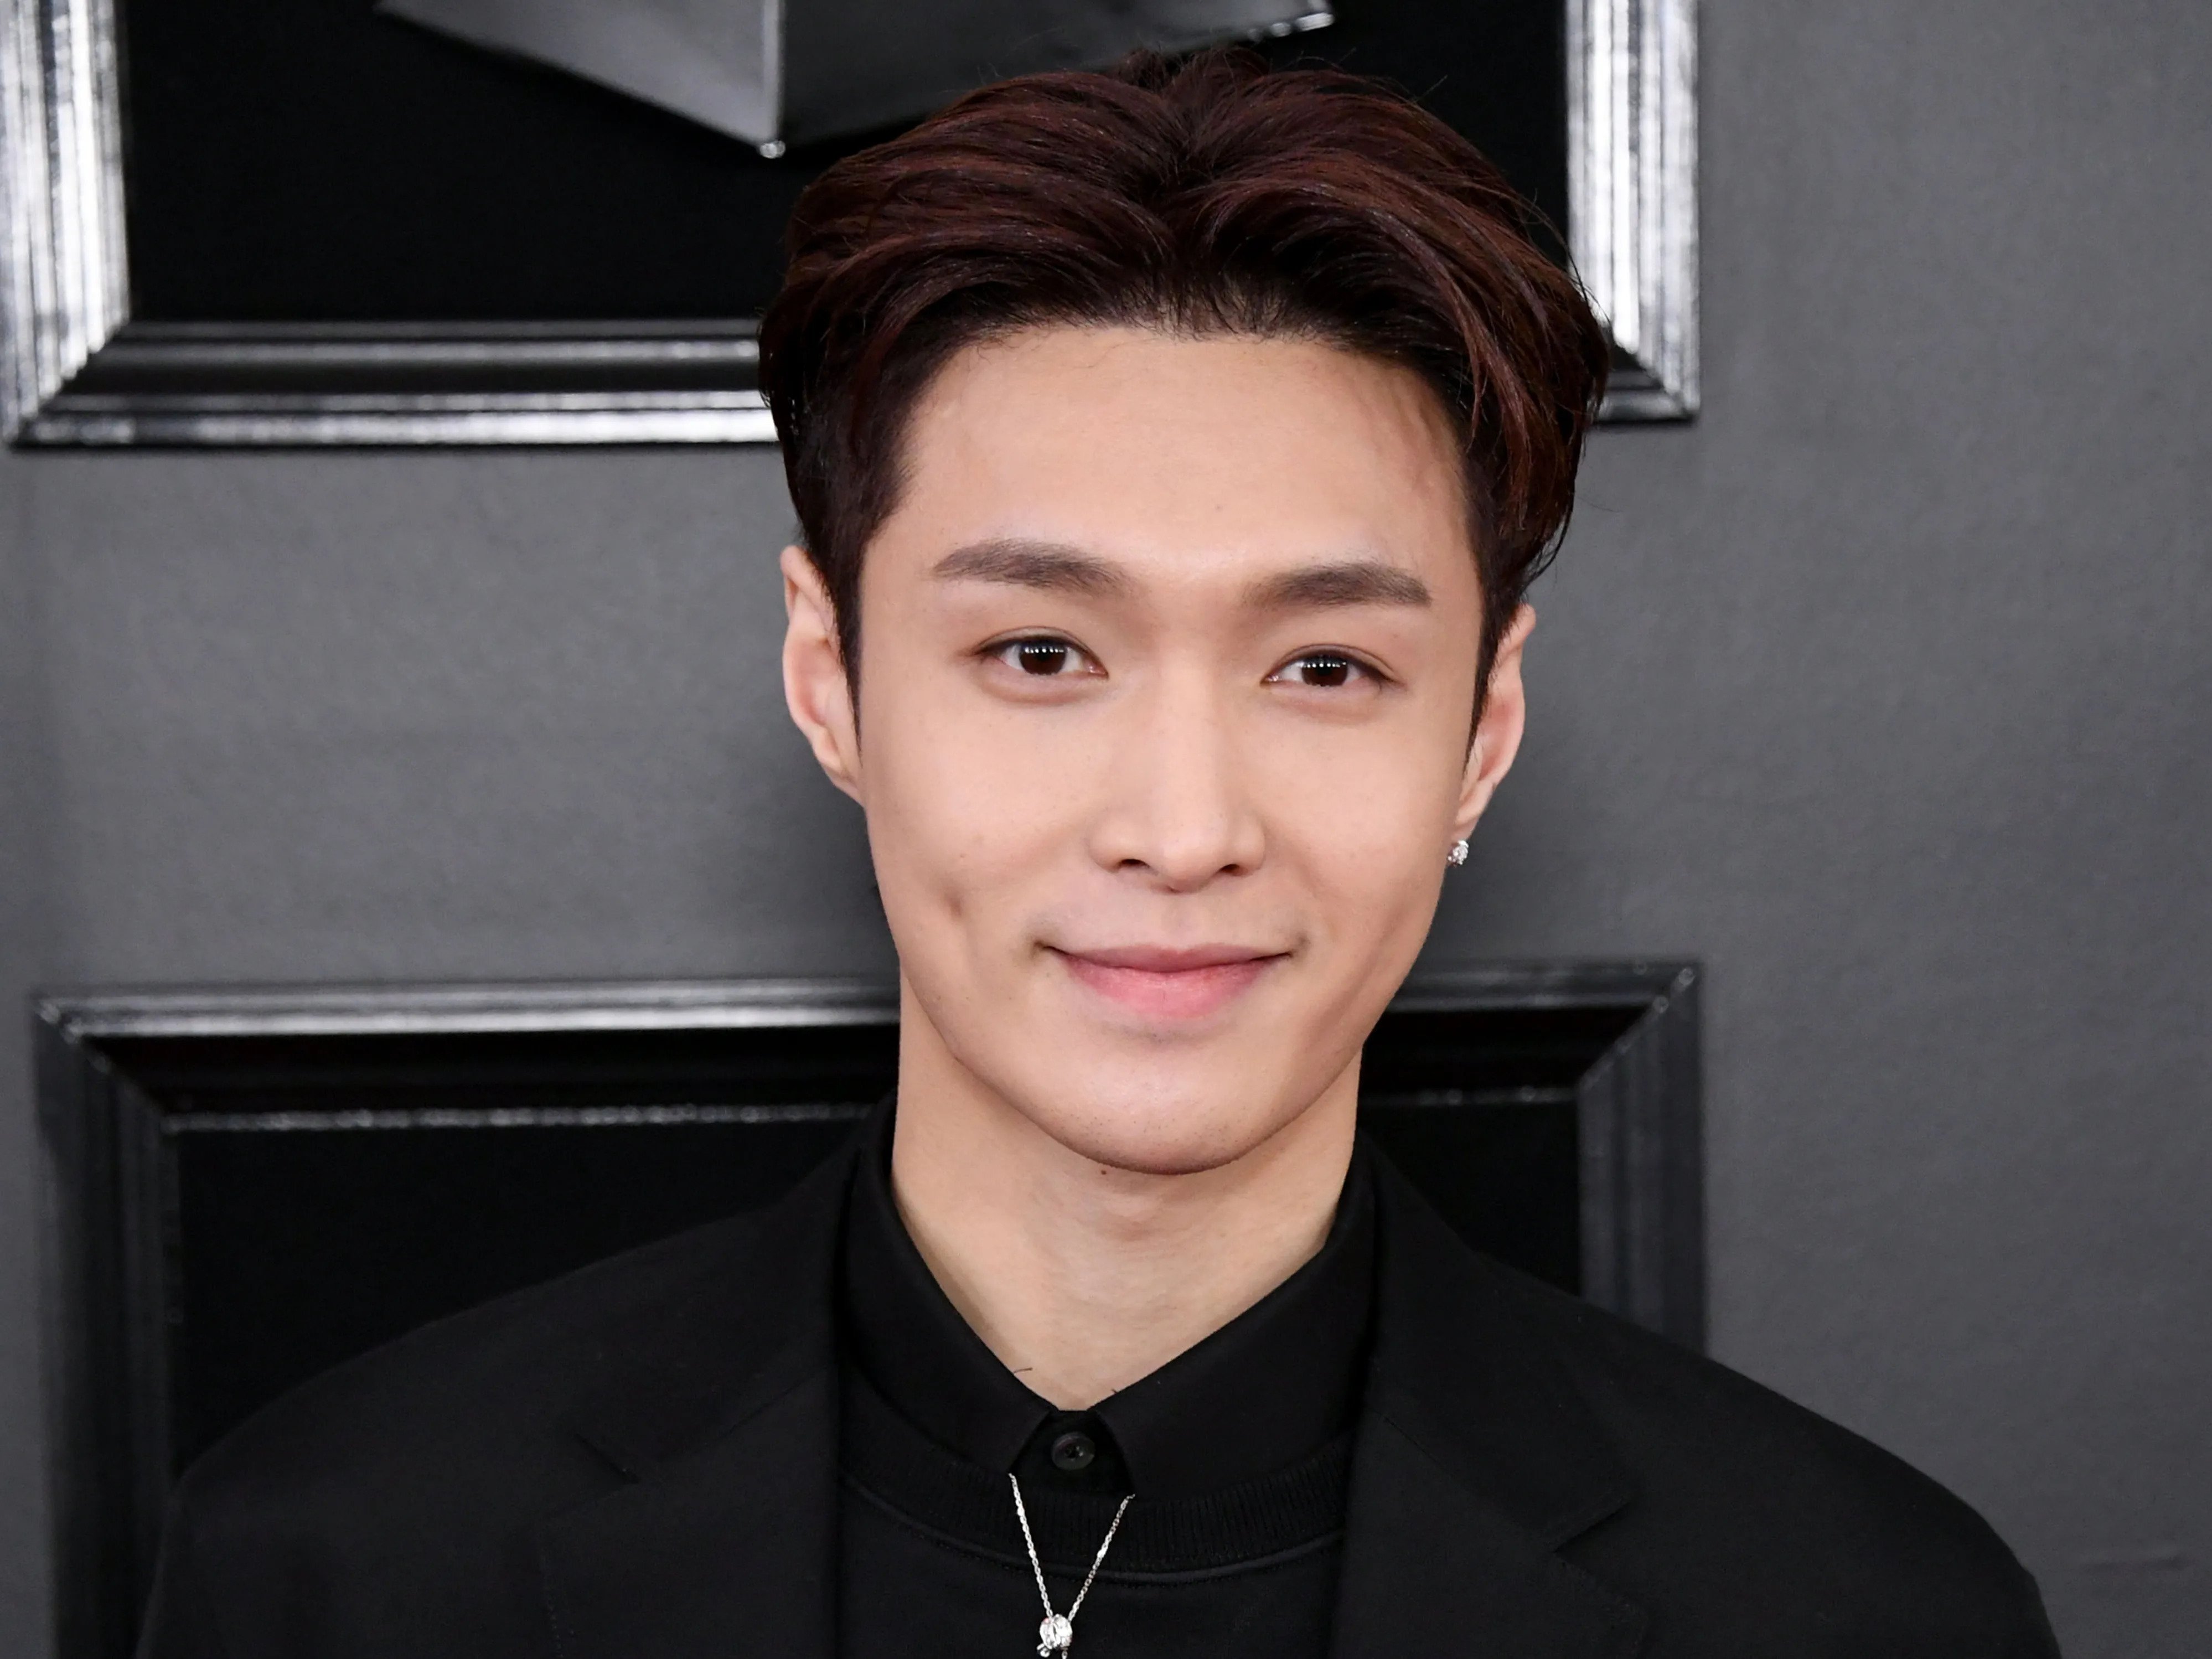 42 Facts about Lay Zhang - Facts.net